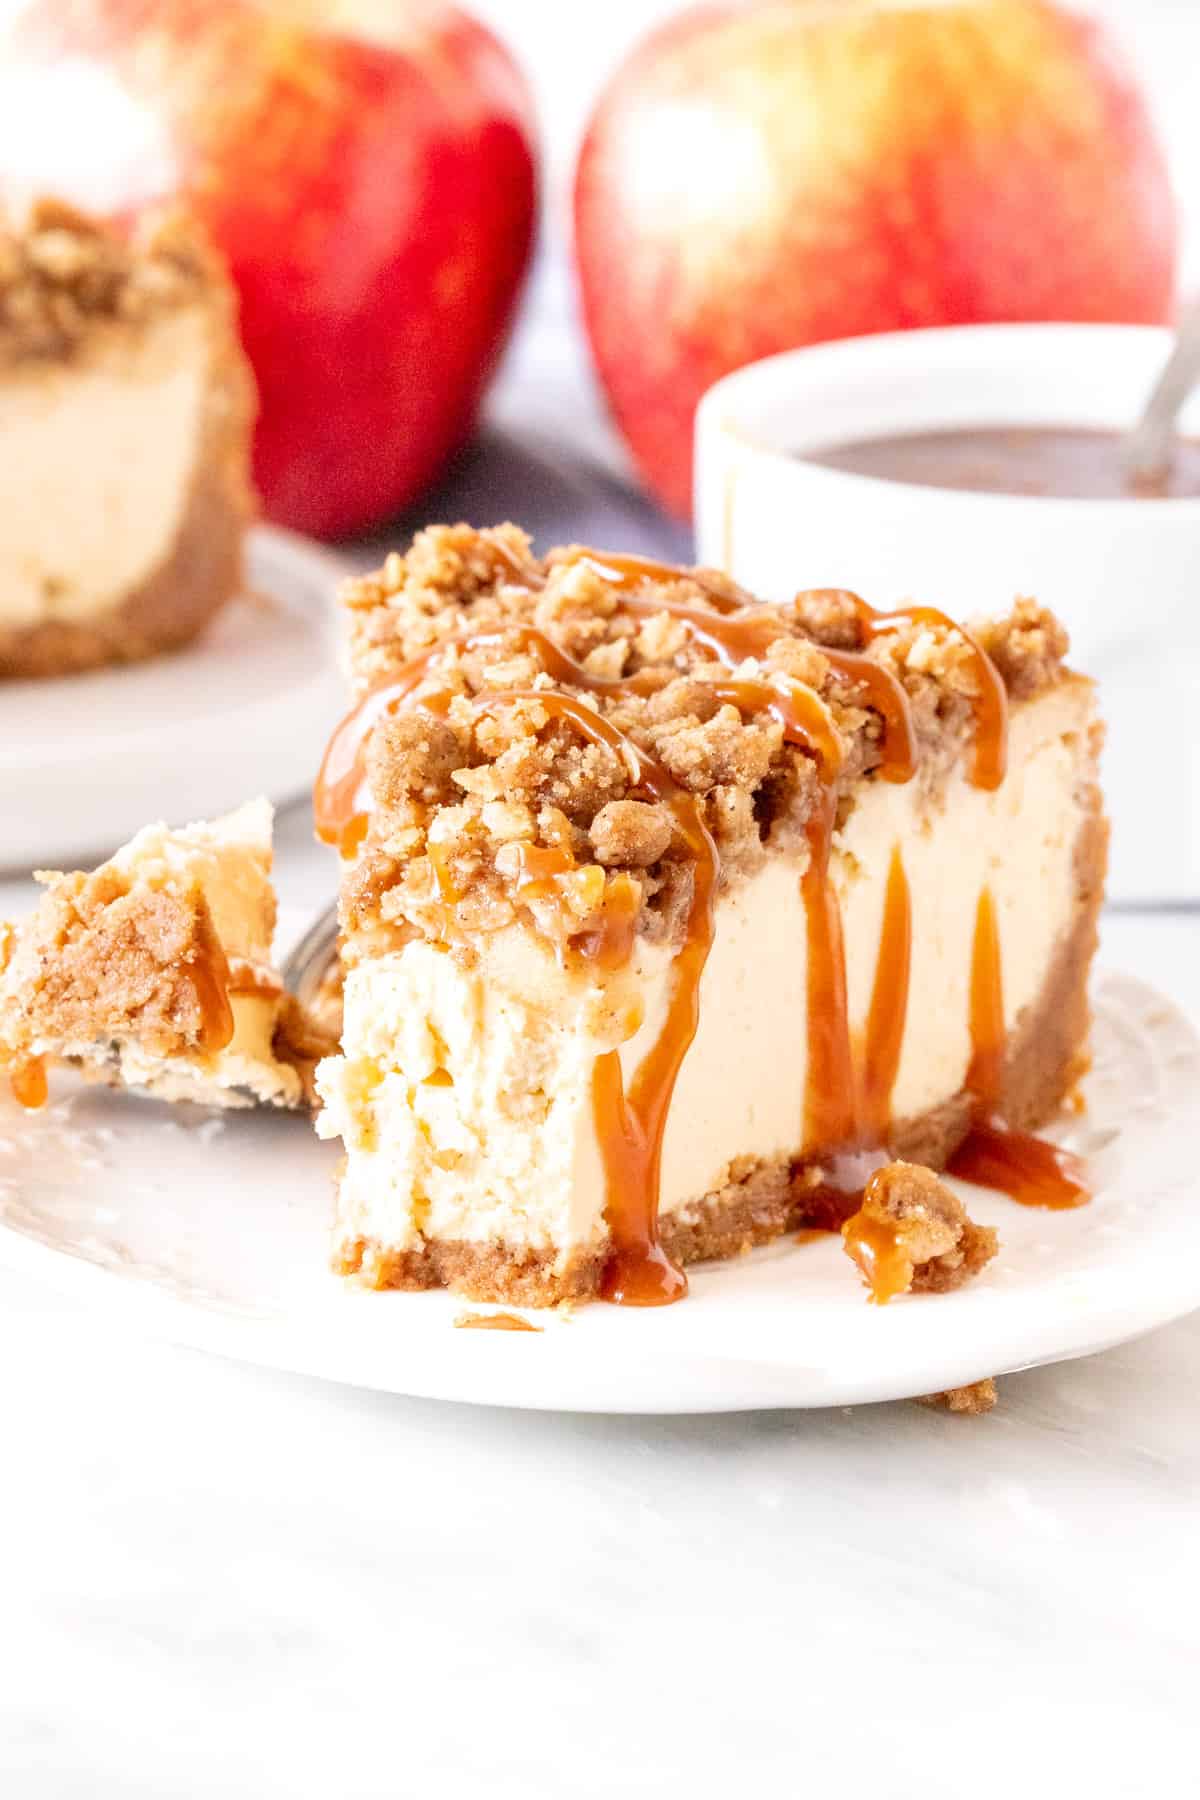 Slice of caramel apple crumble cheesecake with a bite taken out